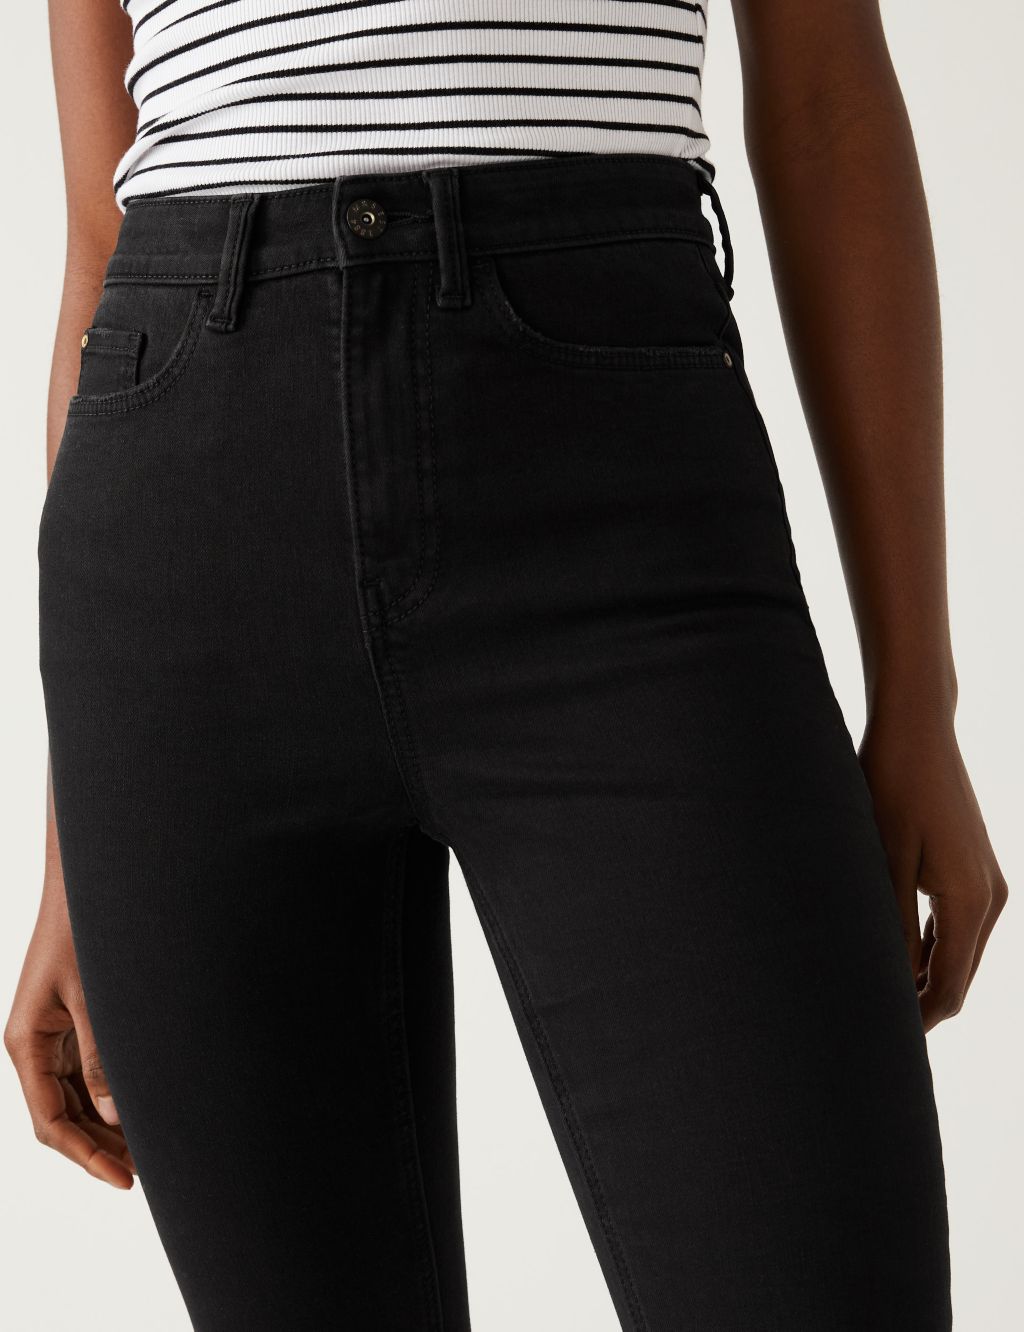 Supersoft High Waisted Skinny Cropped Jeans image 3